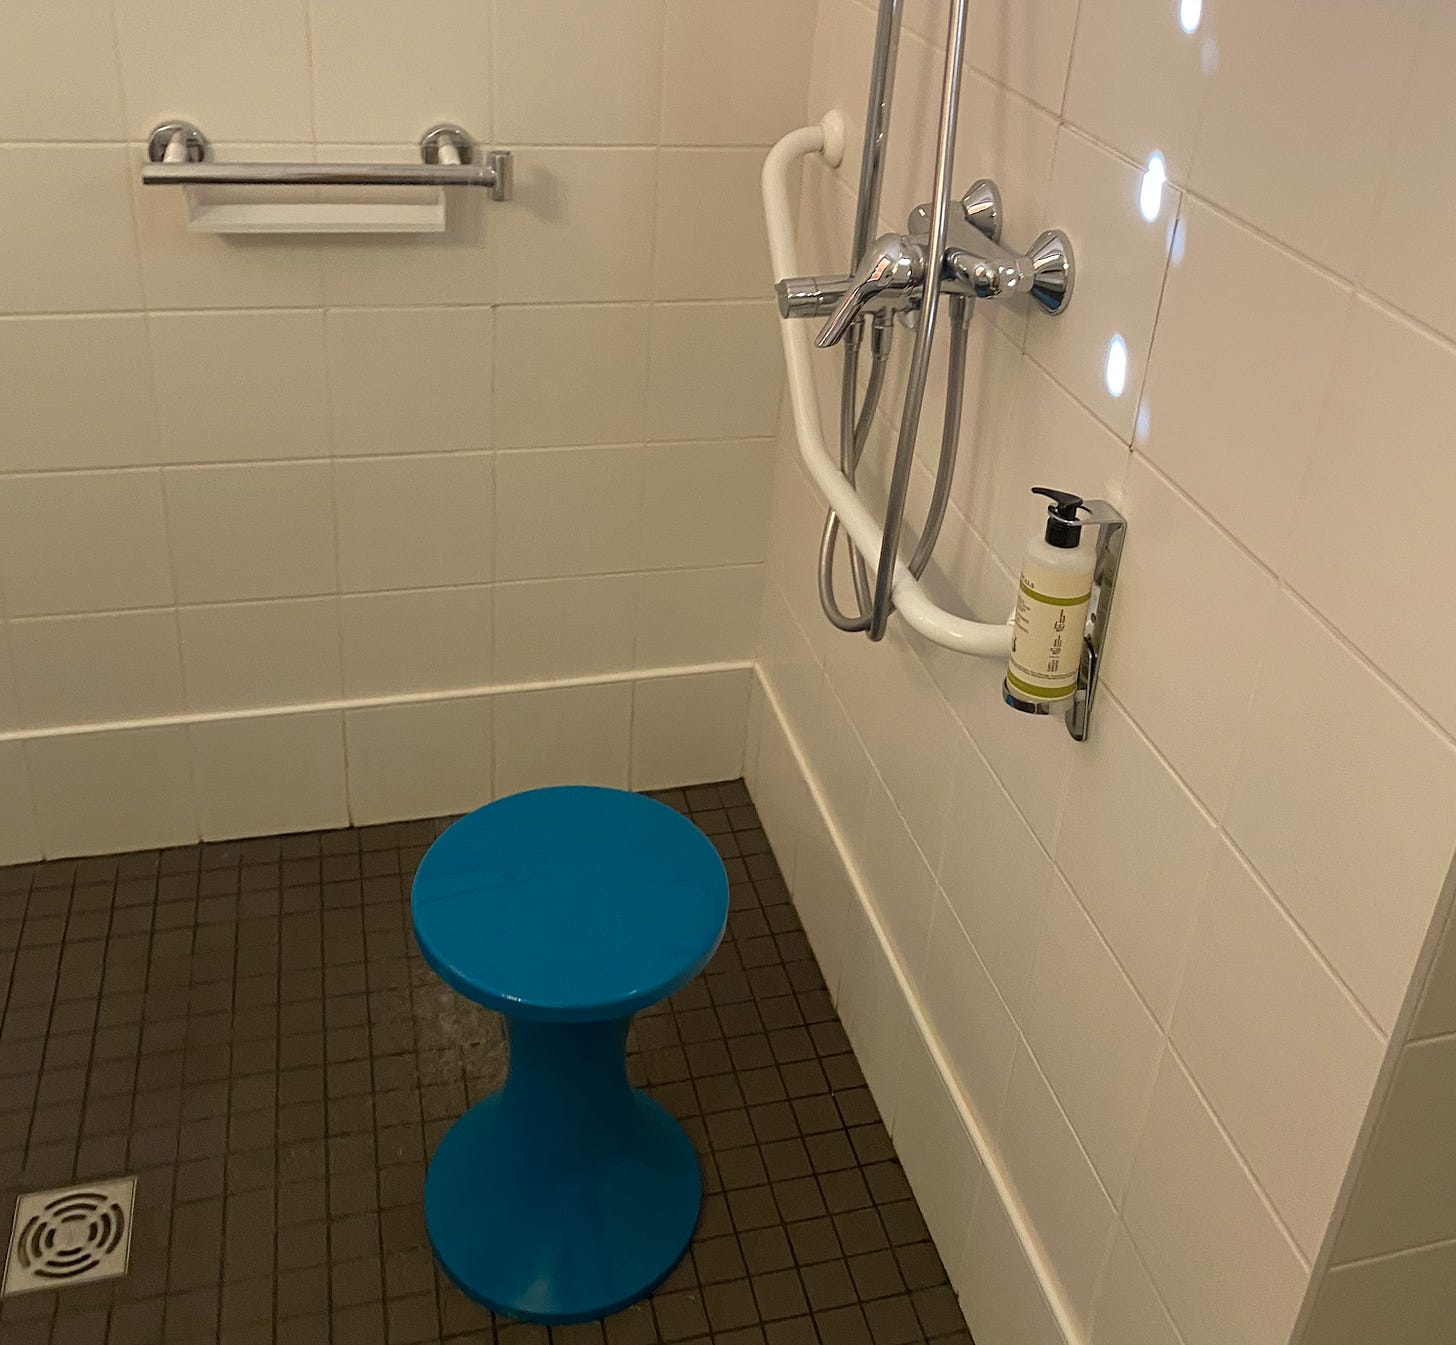 photo of accessible shower in hotel room. a blue plastic stool in a front of a shower head